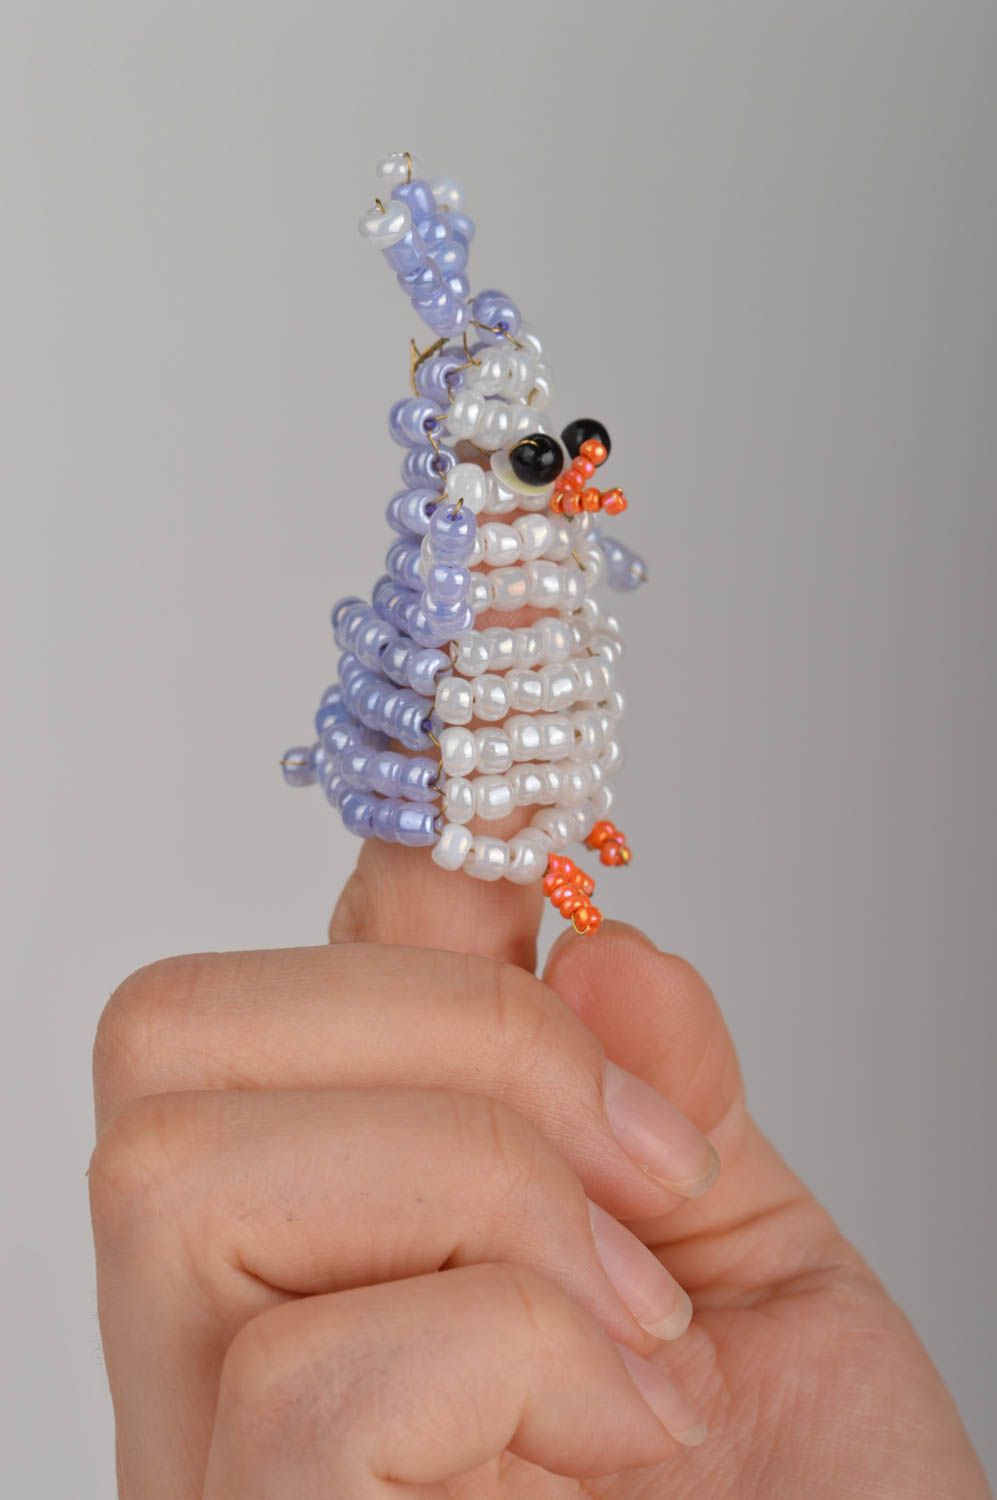 Unusual funny designer small handmade finger toy penguin made of beads photo 3